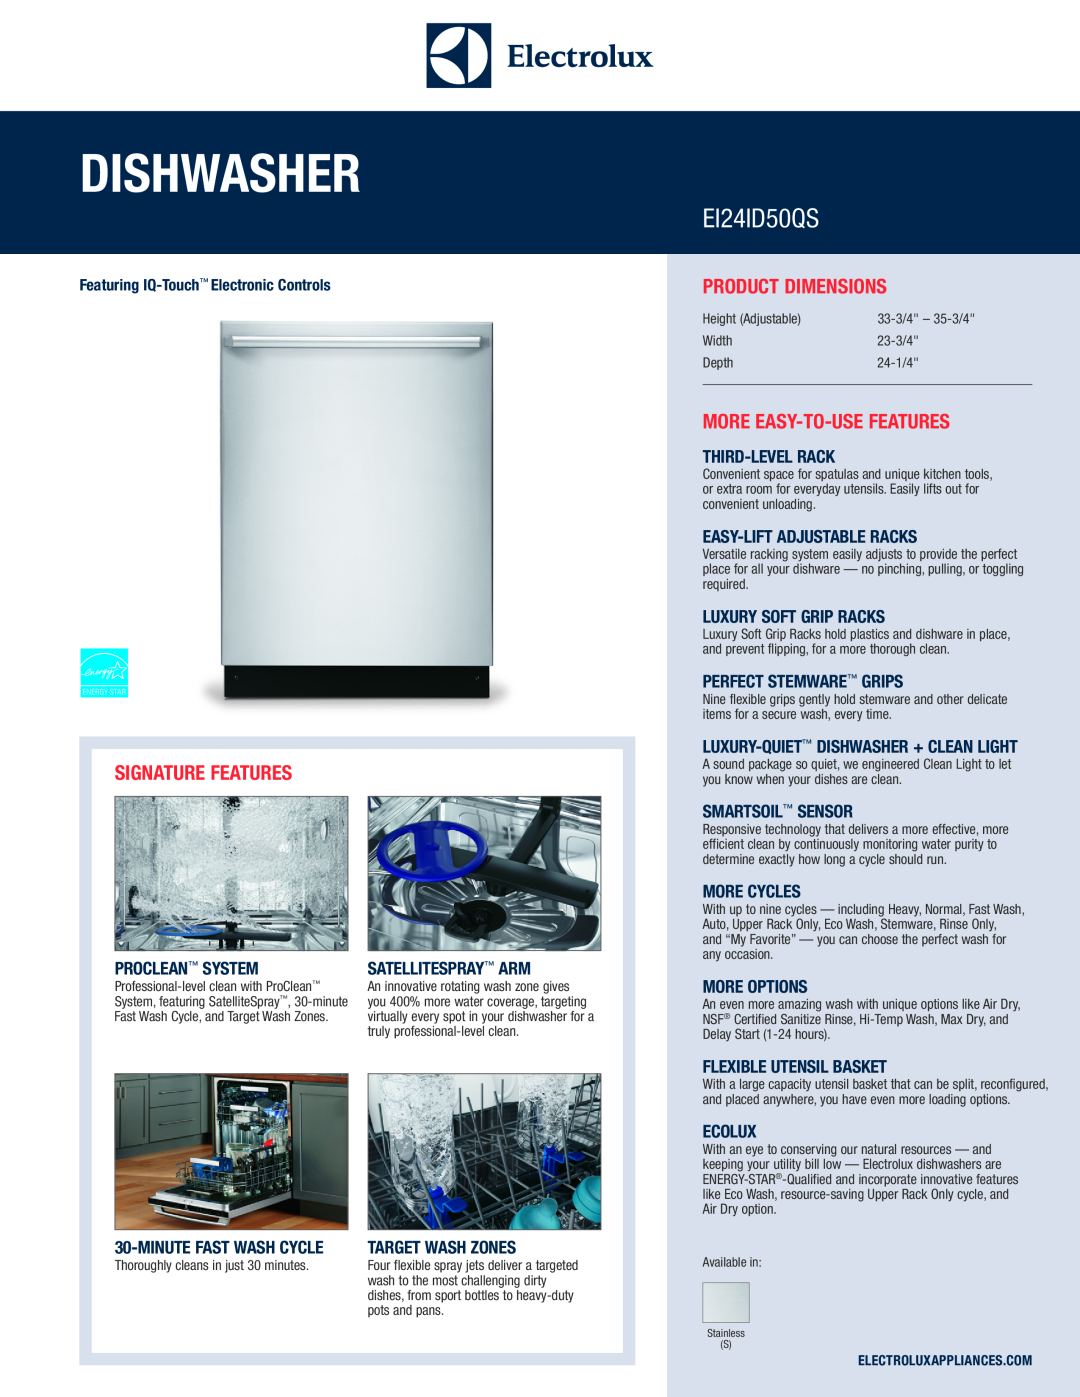 Electrolux EI24ID50QS dimensions Dishwasher, Signature Features, Product Dimensions, More Easy-To-Use Features 